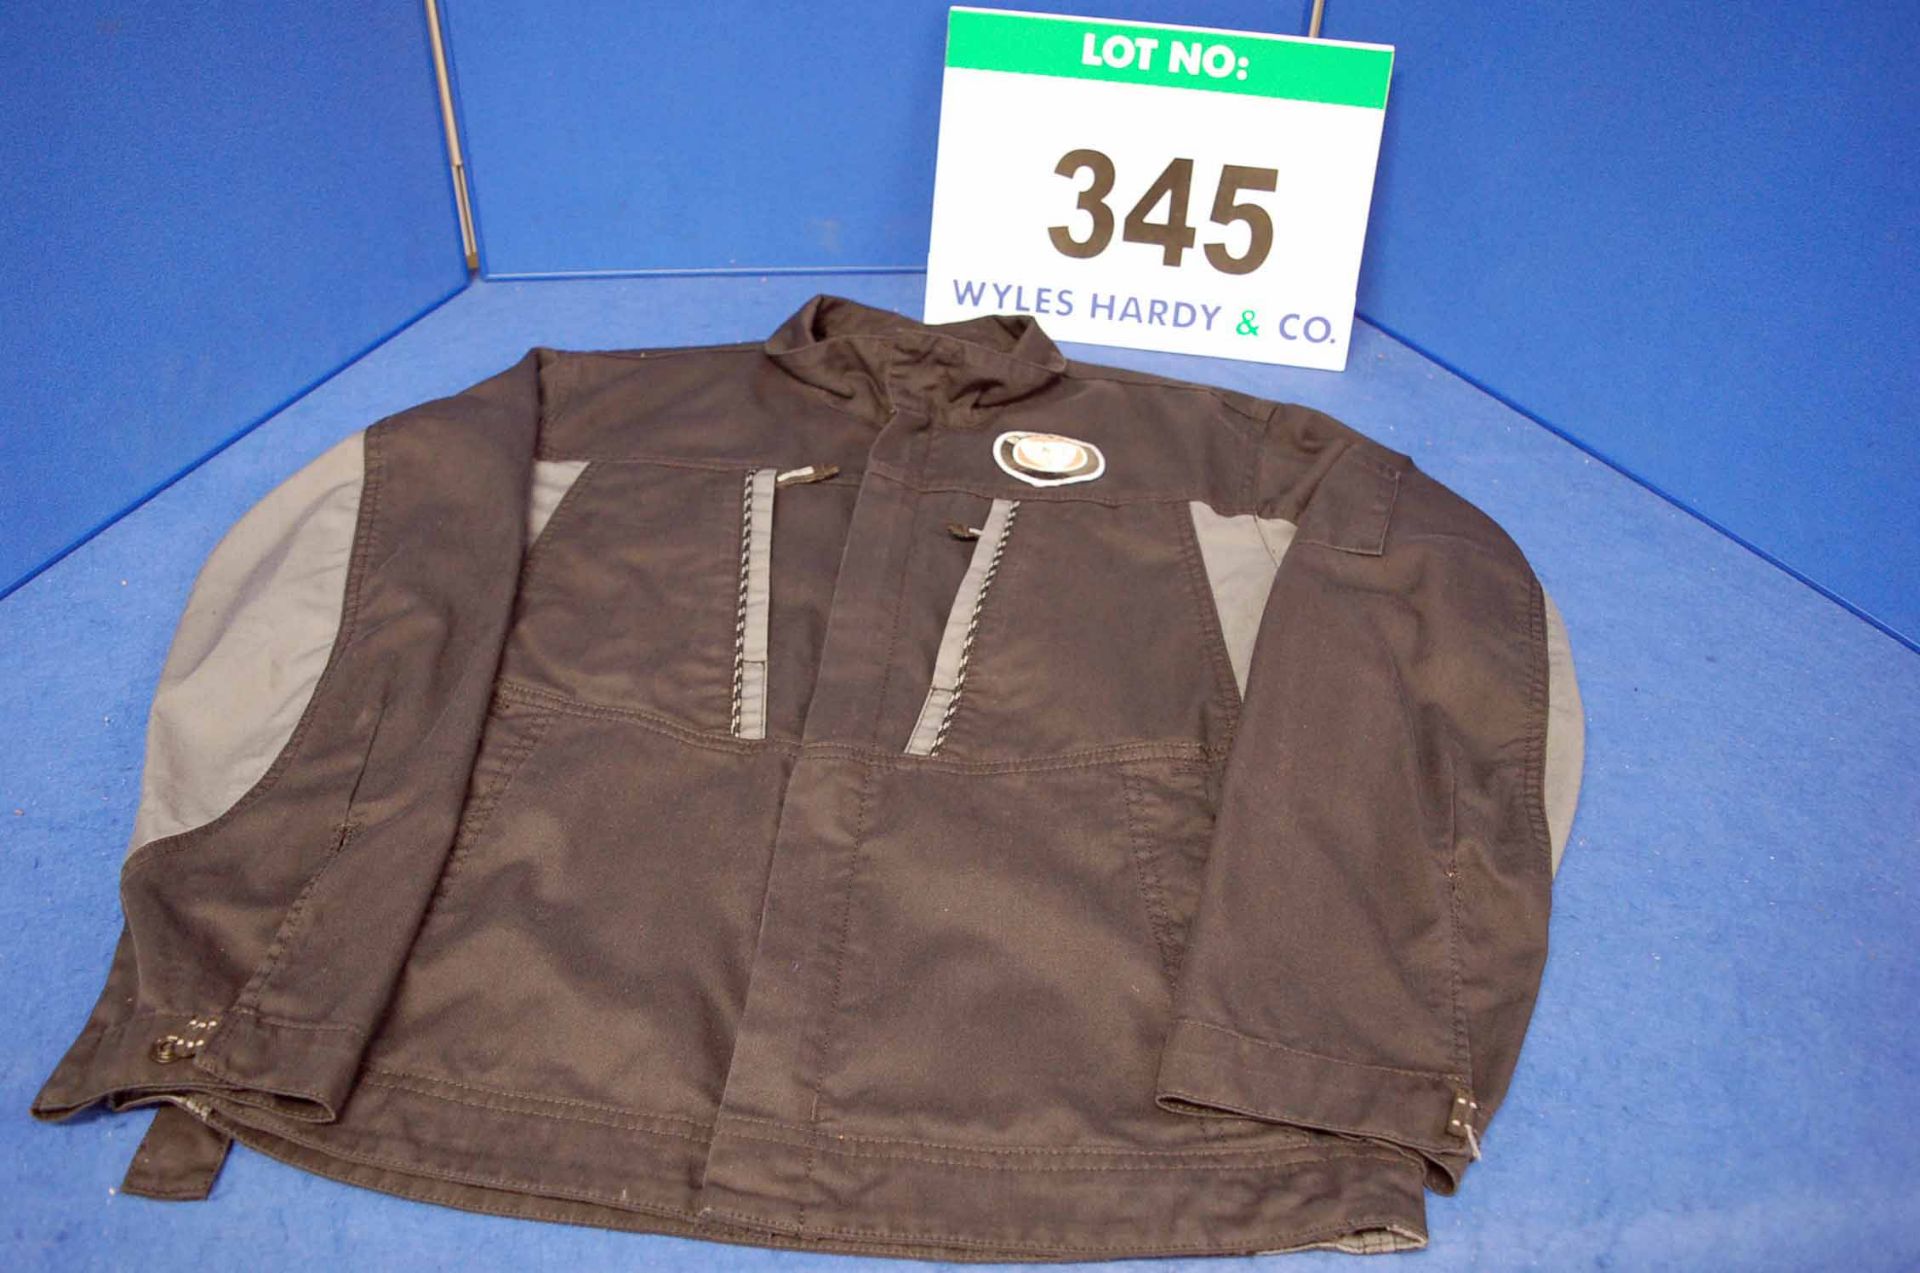 A Used Black and Grey Cotton Mechanics Jacket with Bristol Badge on Upper Left Chest Panel with